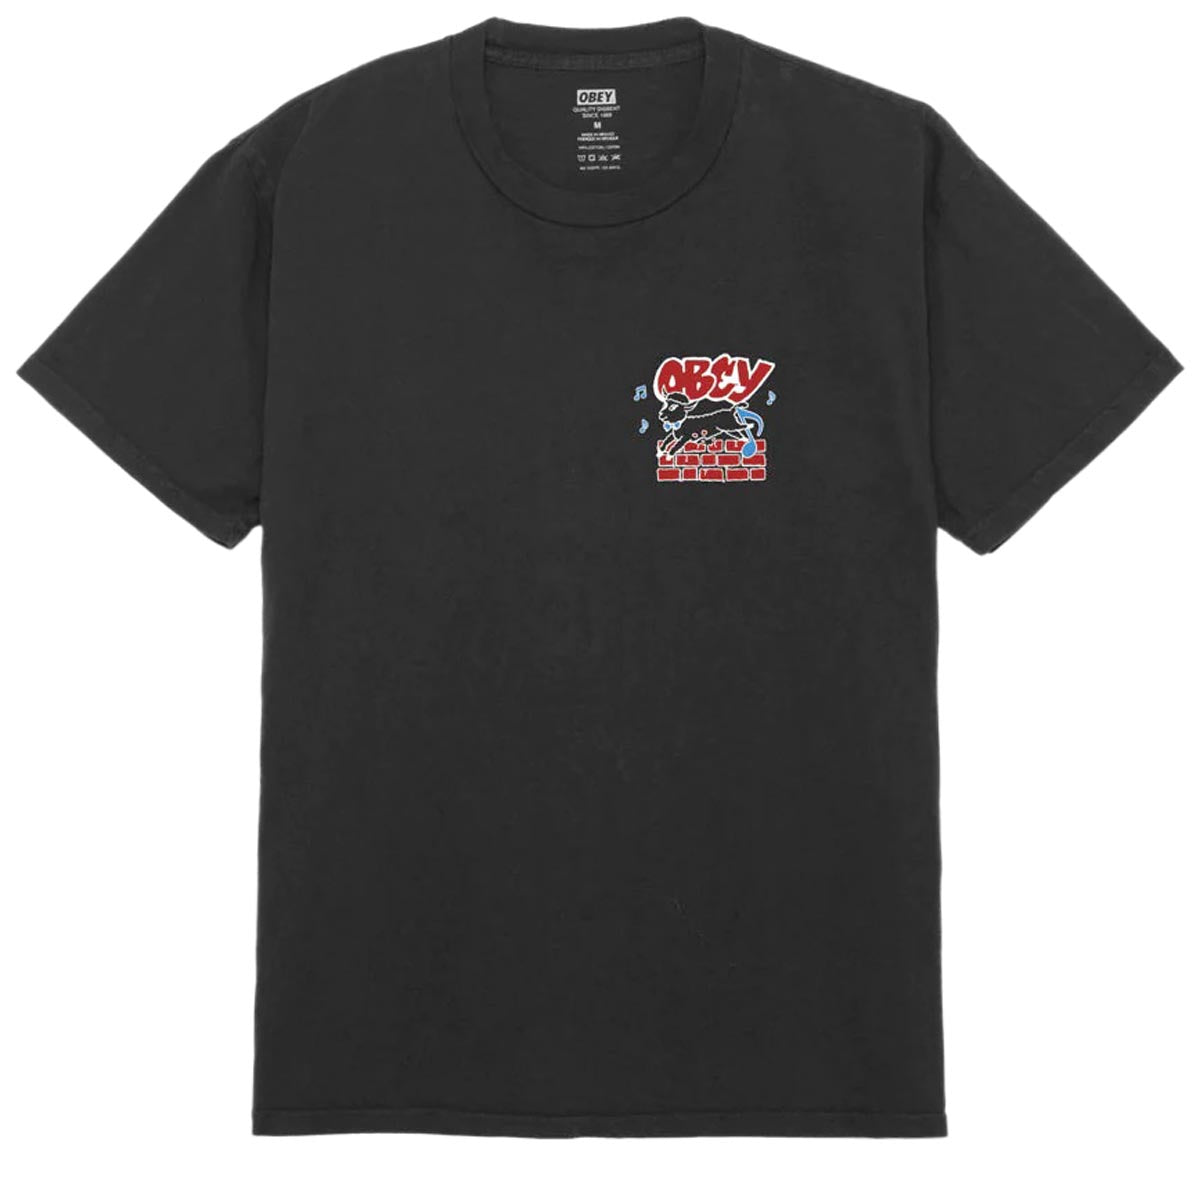 Obey Out Of Step T-Shirt - Pigment Vintage Black image 2